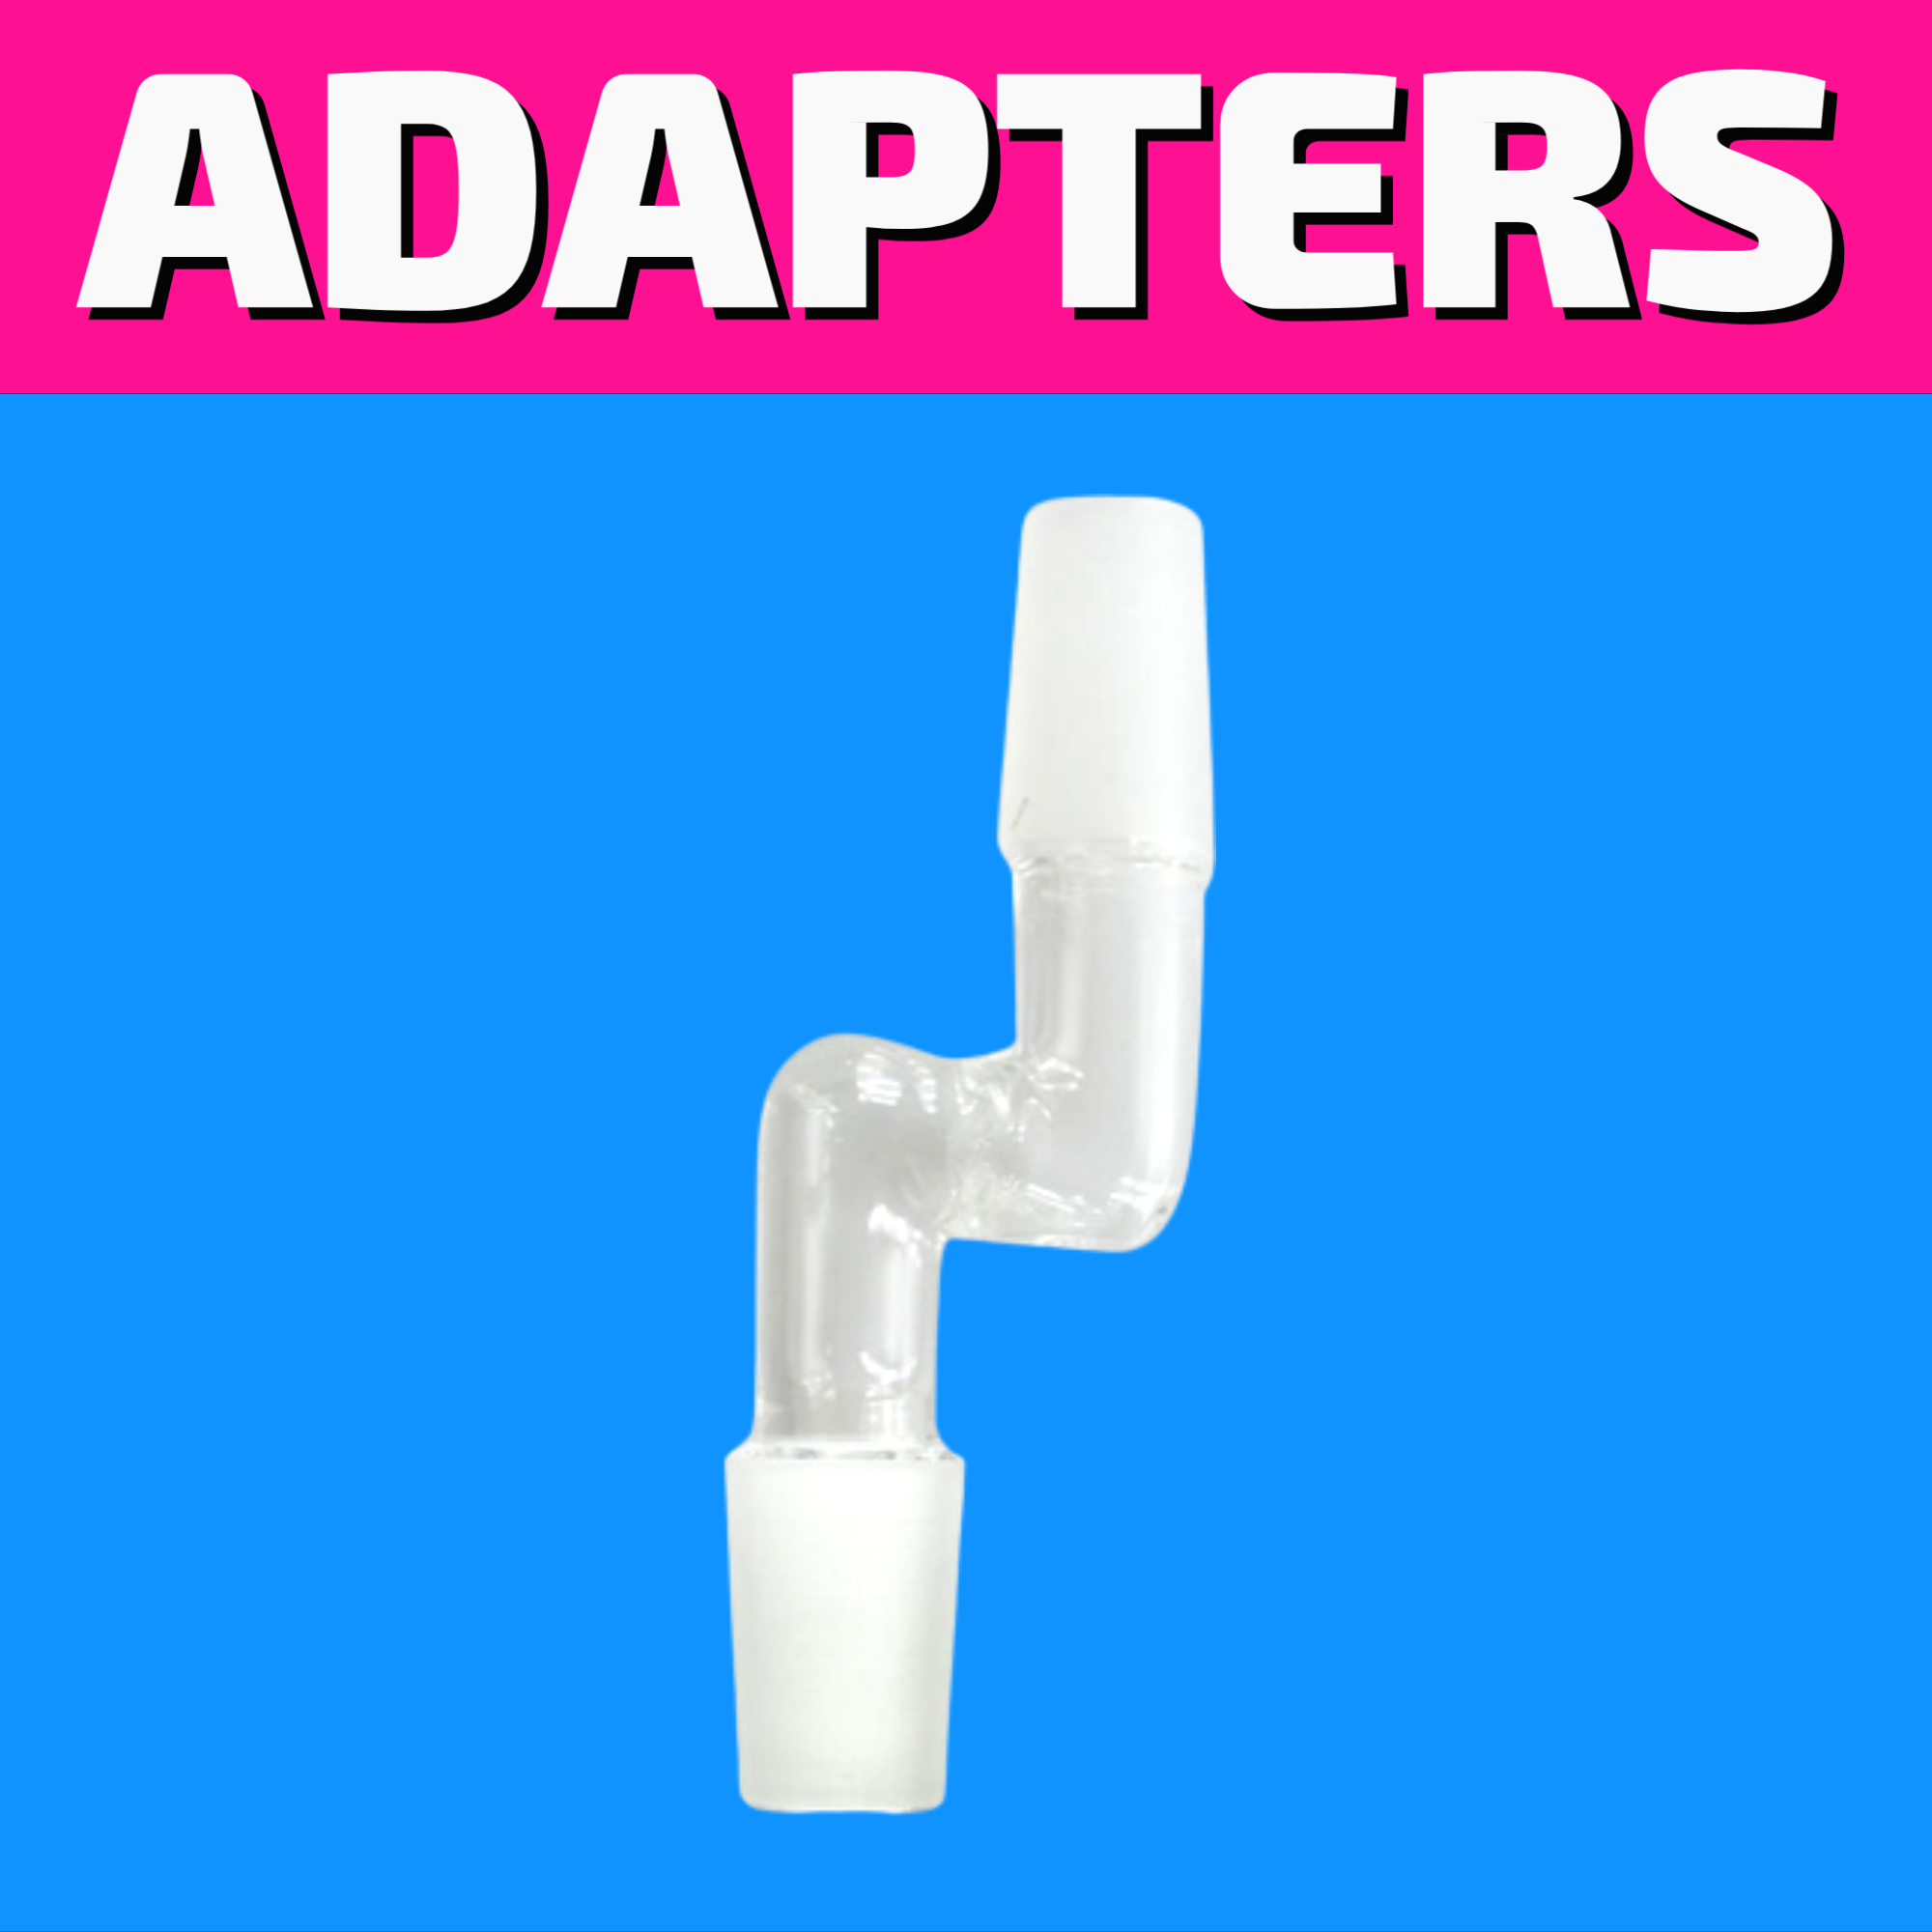 Shop Winnipeg's best selection of Adaptors, Ash Catchers, Bong Bowls, and Glass Screens for same day delivery or buy them in-store.   